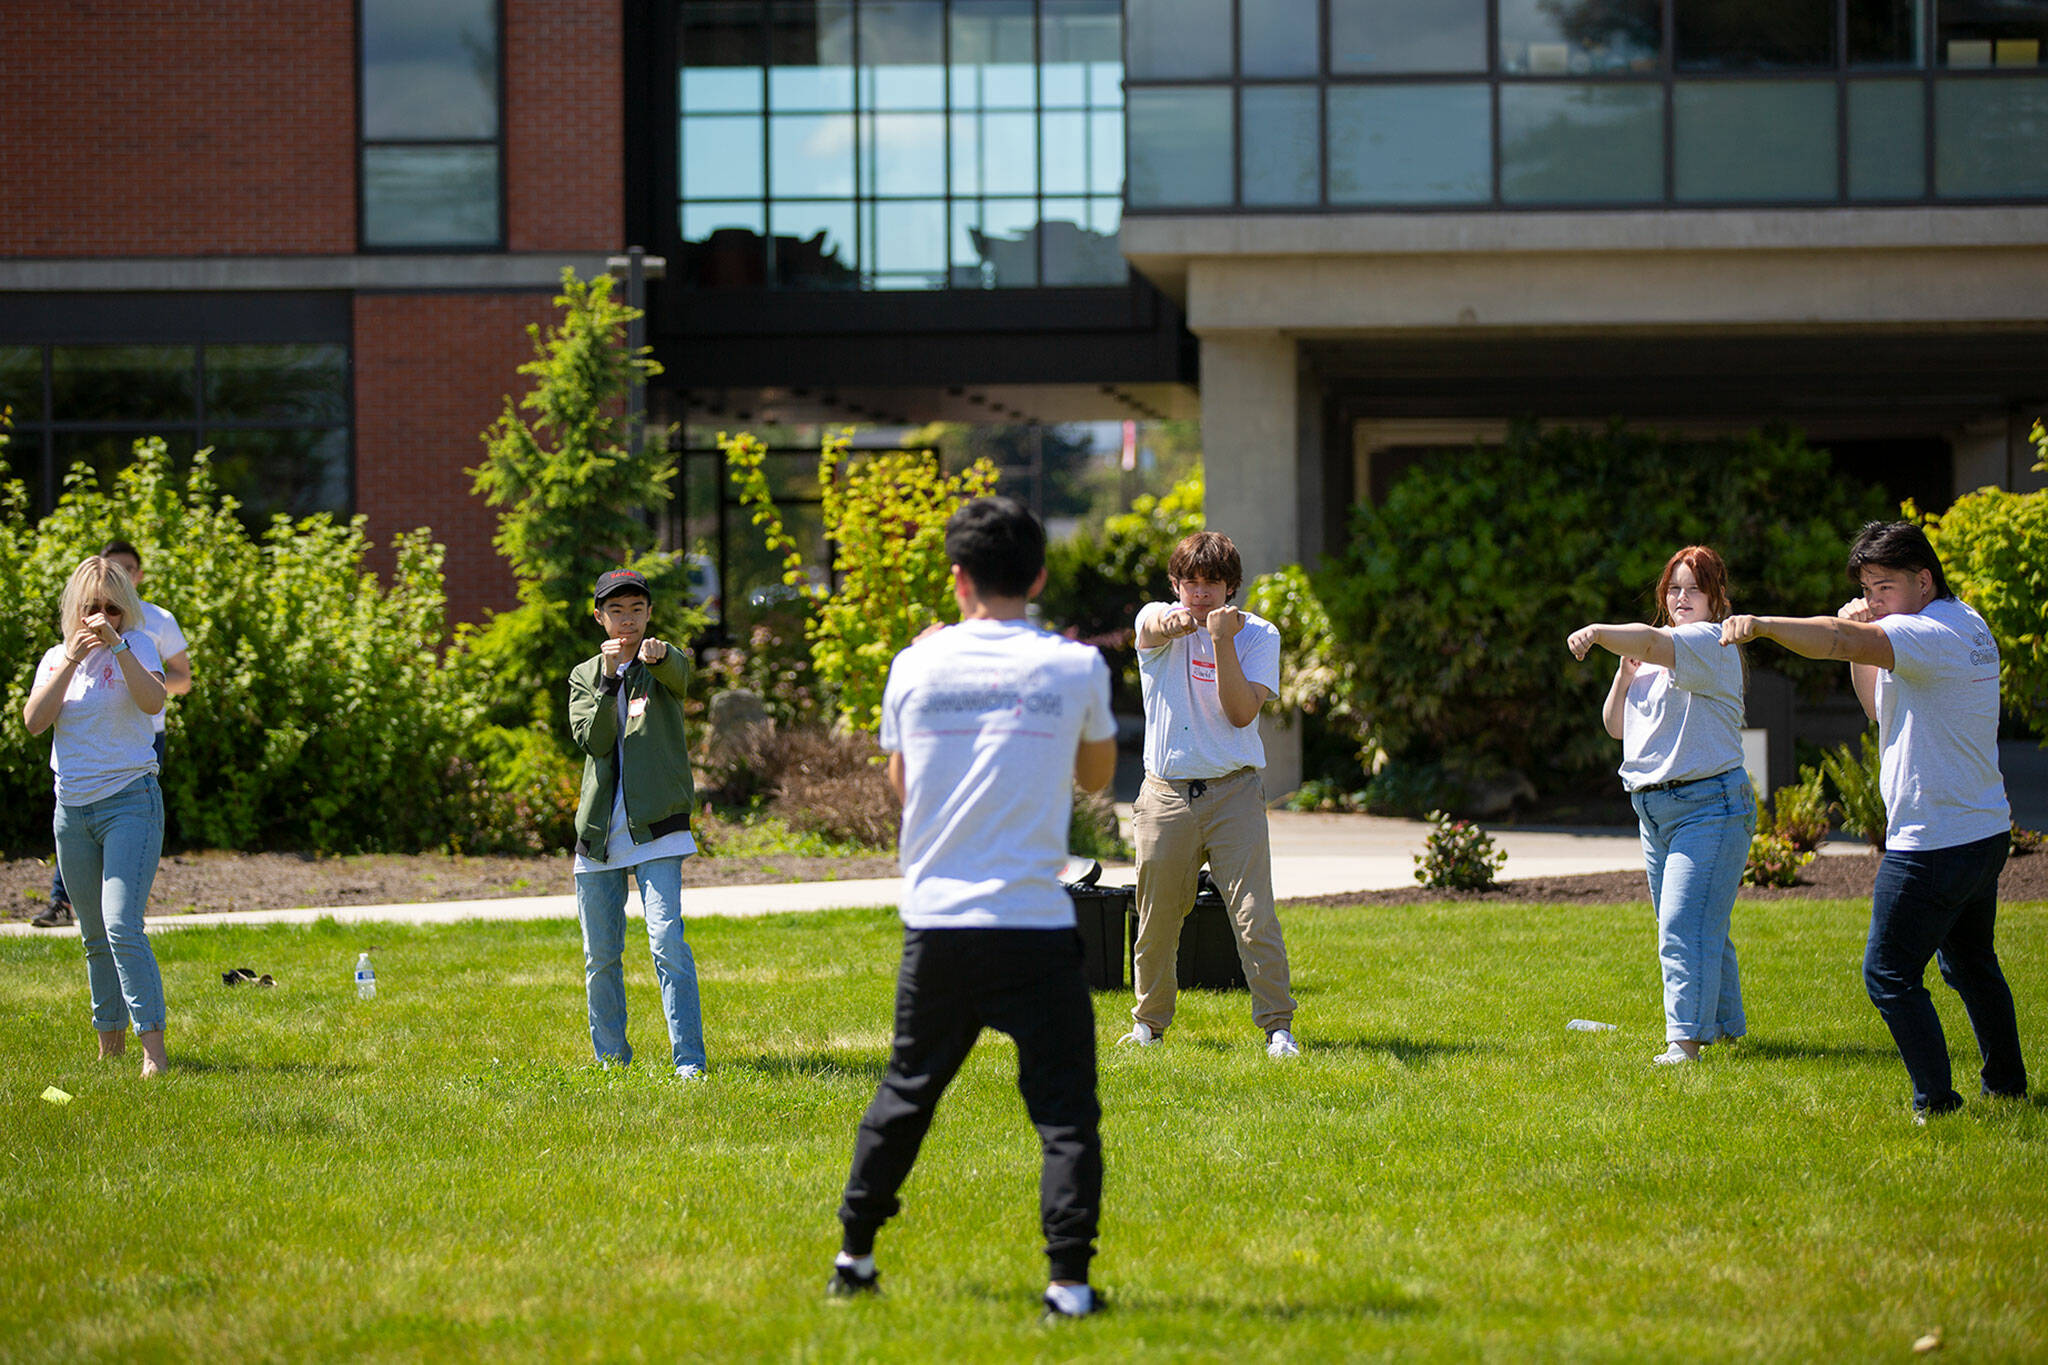 Kevin Leung leads a group of students through the basics of martial arts during Leadership Launch’s “Emotion Commotion” event at Everett Community College in Everett. (Ryan Berry / The Herald)